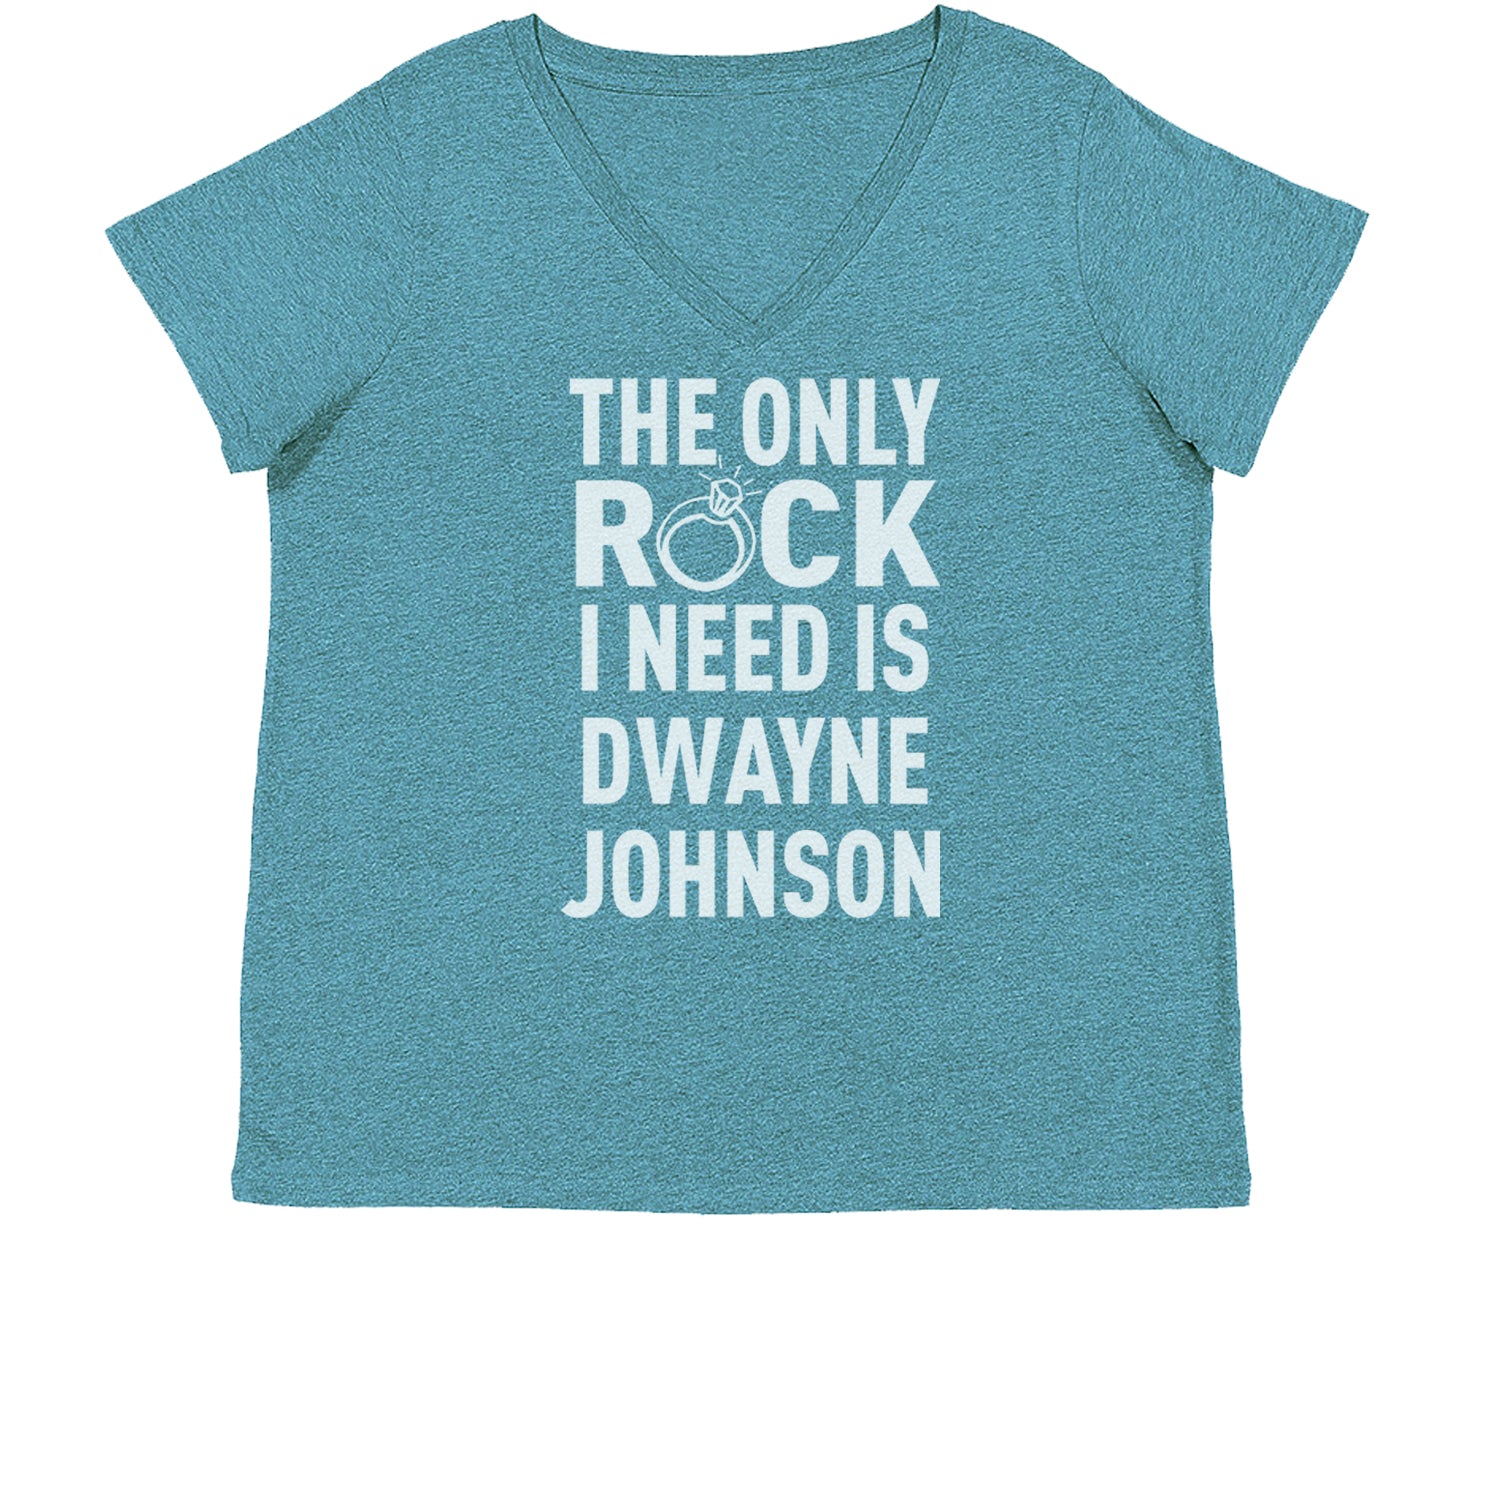 The Only Rock I Need Is Dwayne Johnson Womens Plus Size V-Neck T-shirt dwayne, johnson, marry, me, ring, rock, the, wedding by Expression Tees